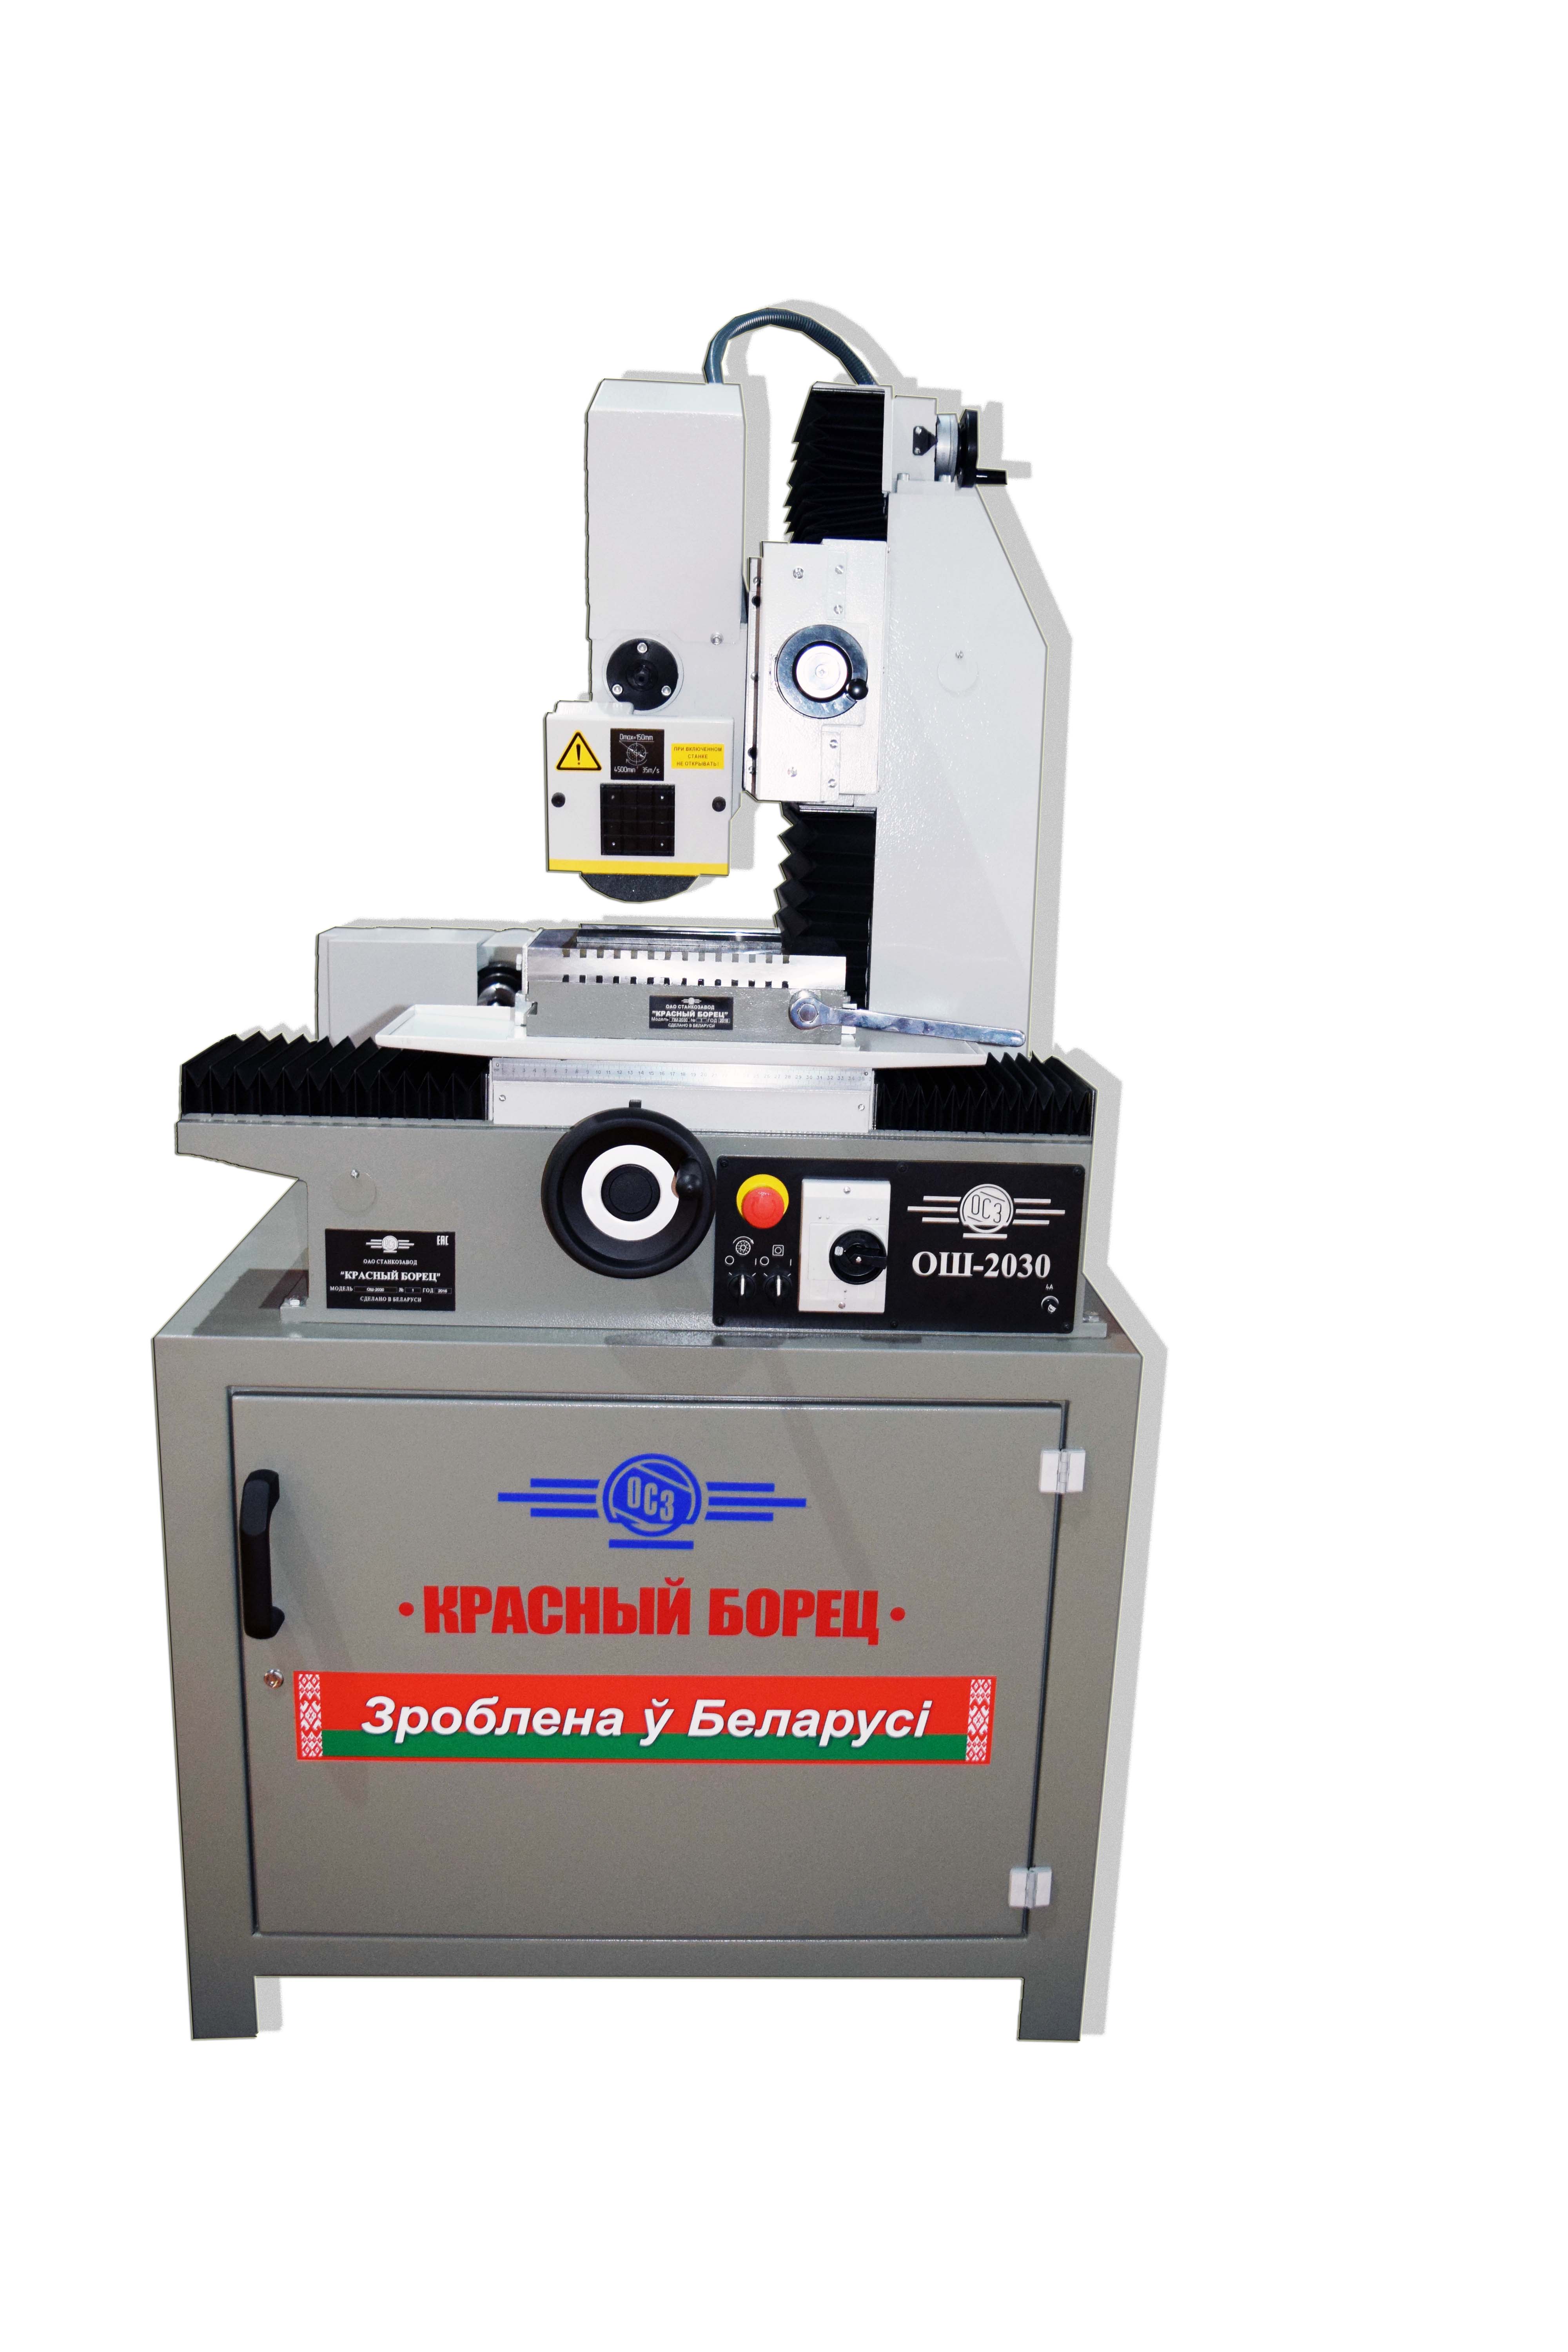 SURFACE GRINDING MACHINE WITH MANUAL CONTROL MODEL OSH-2030